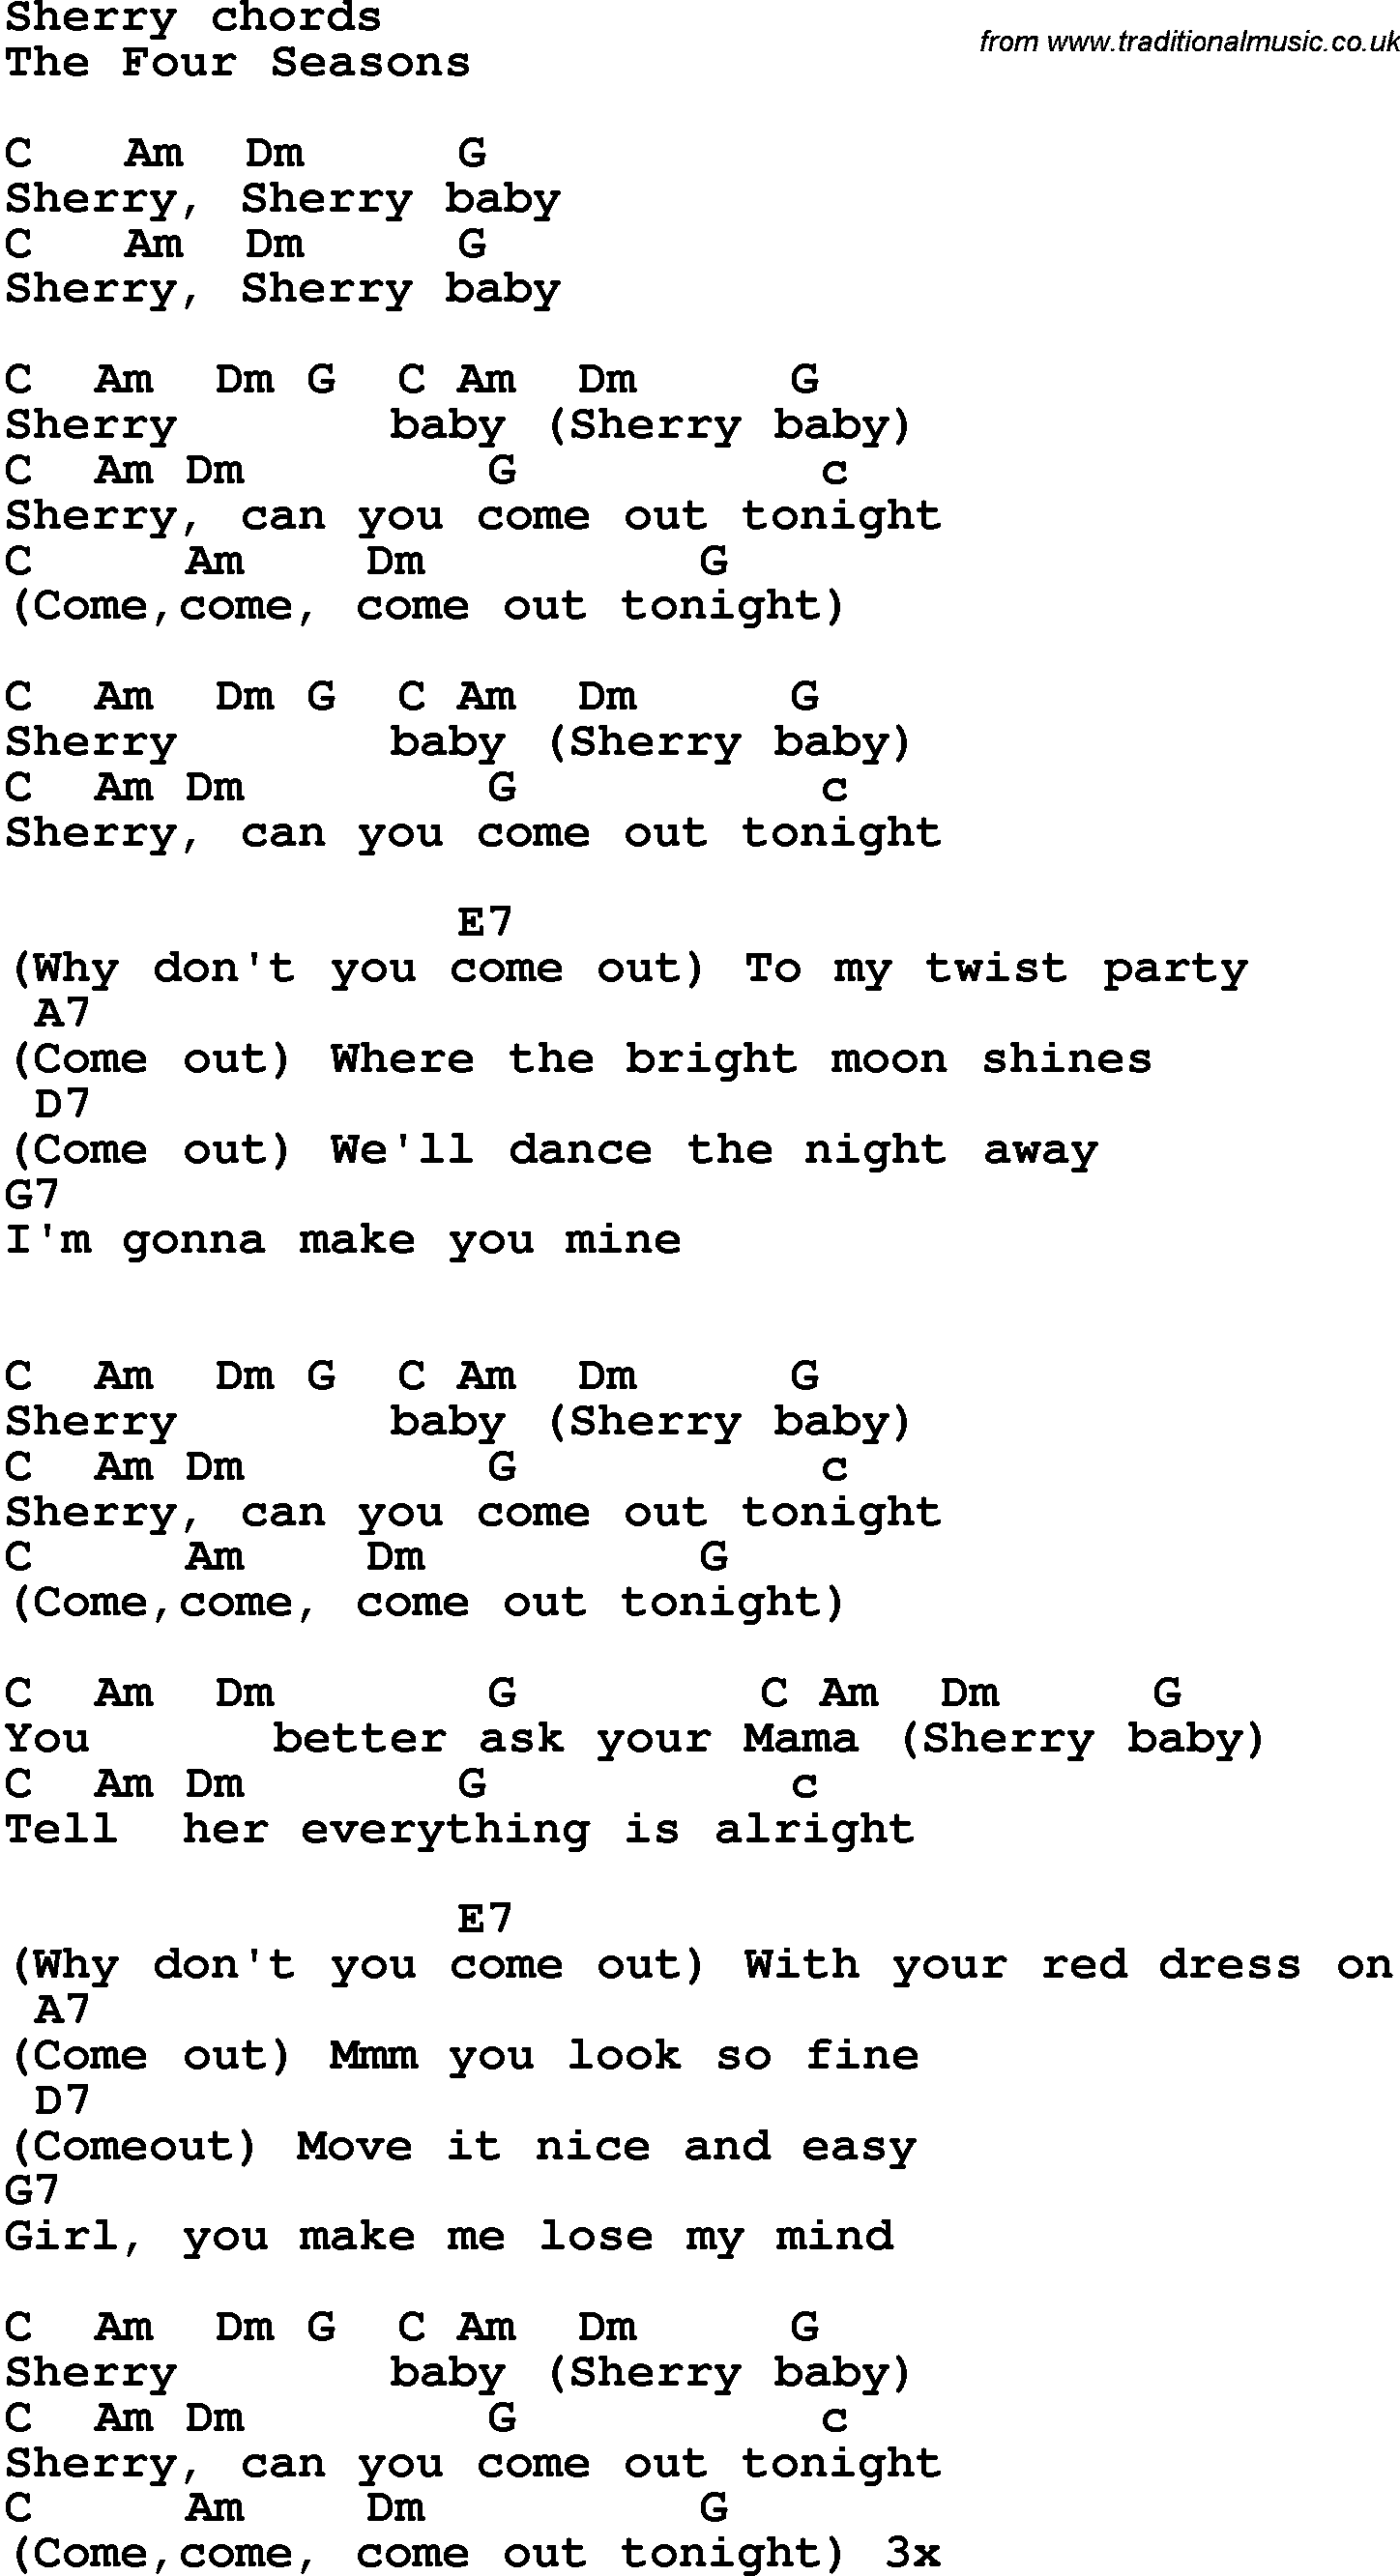 Song Lyrics with guitar chords for Sherry